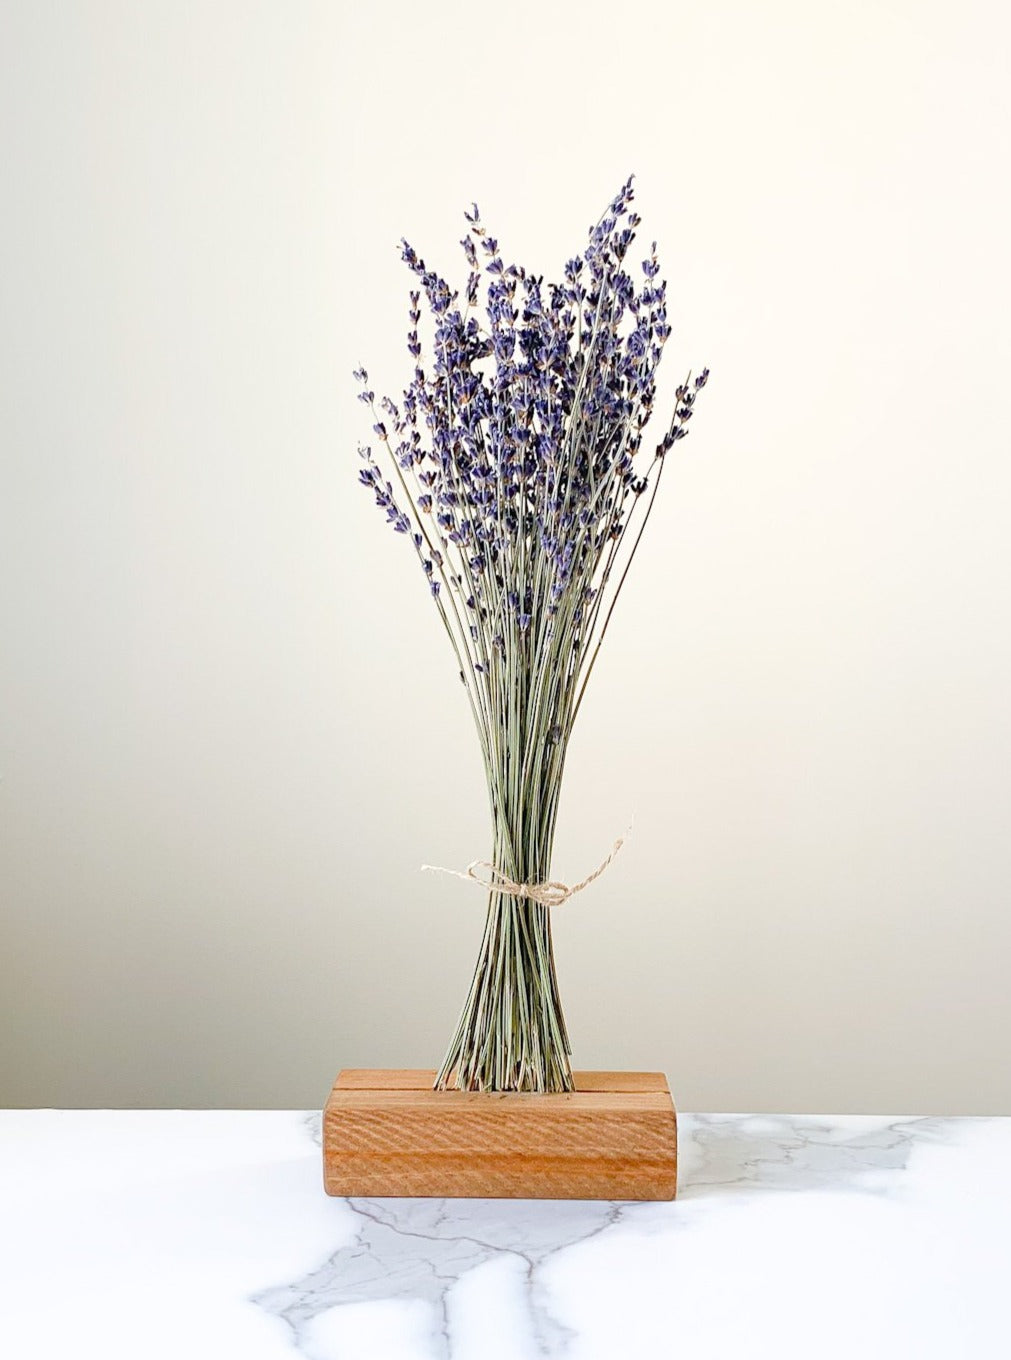 Lavender bunch staged in a wooden stand with a white and gray marble background.